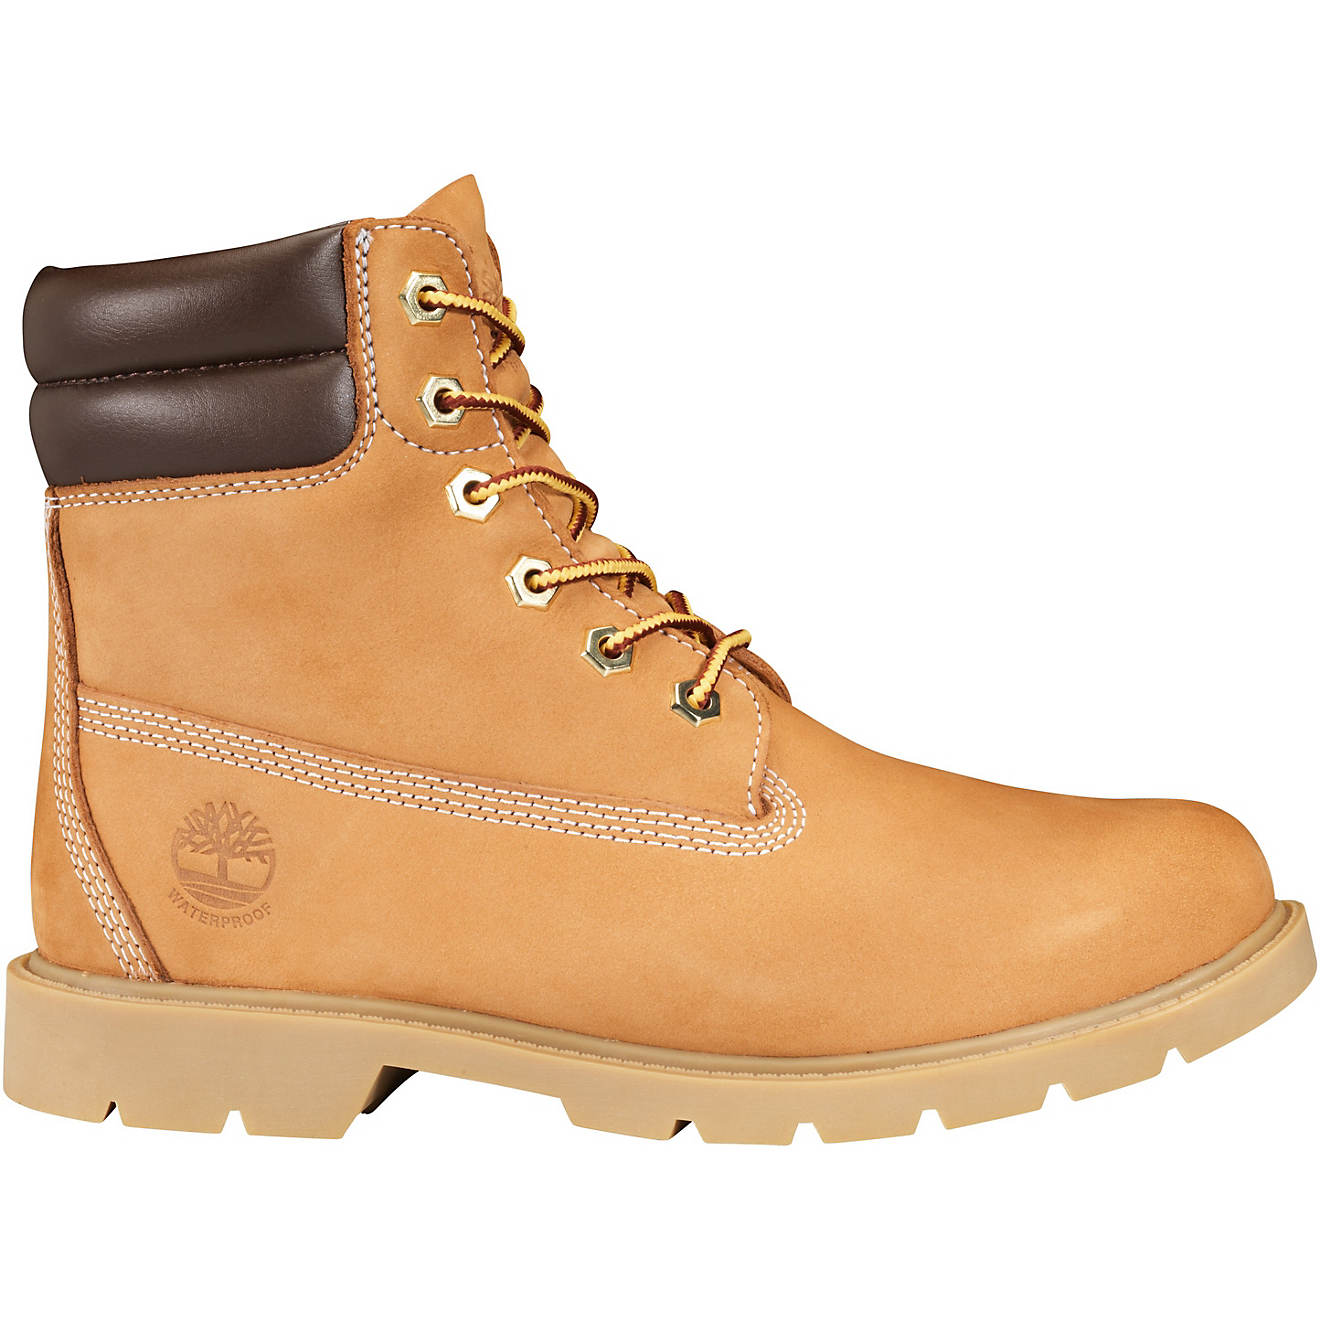 Timberland Women's Linden Woods Waterproof Lace Up Boots | Academy